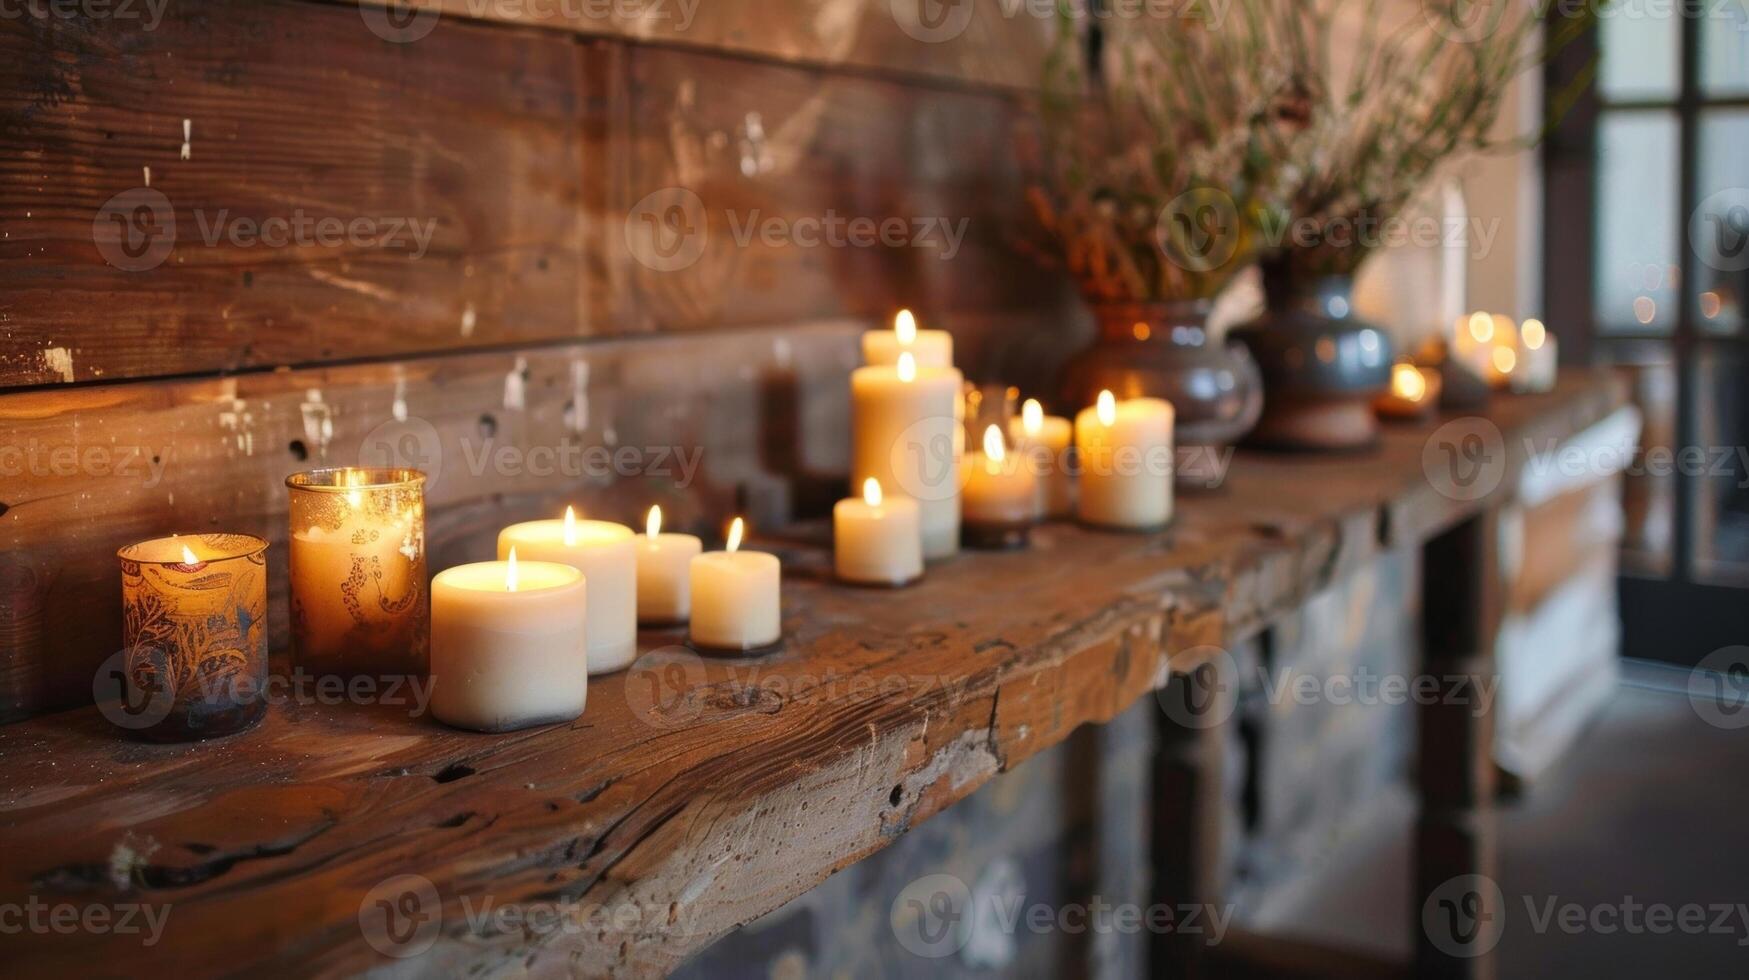 A rustic industrial space transformed into an intimate haven with the addition of numerous candles in mismatched holders. 2d flat cartoon photo